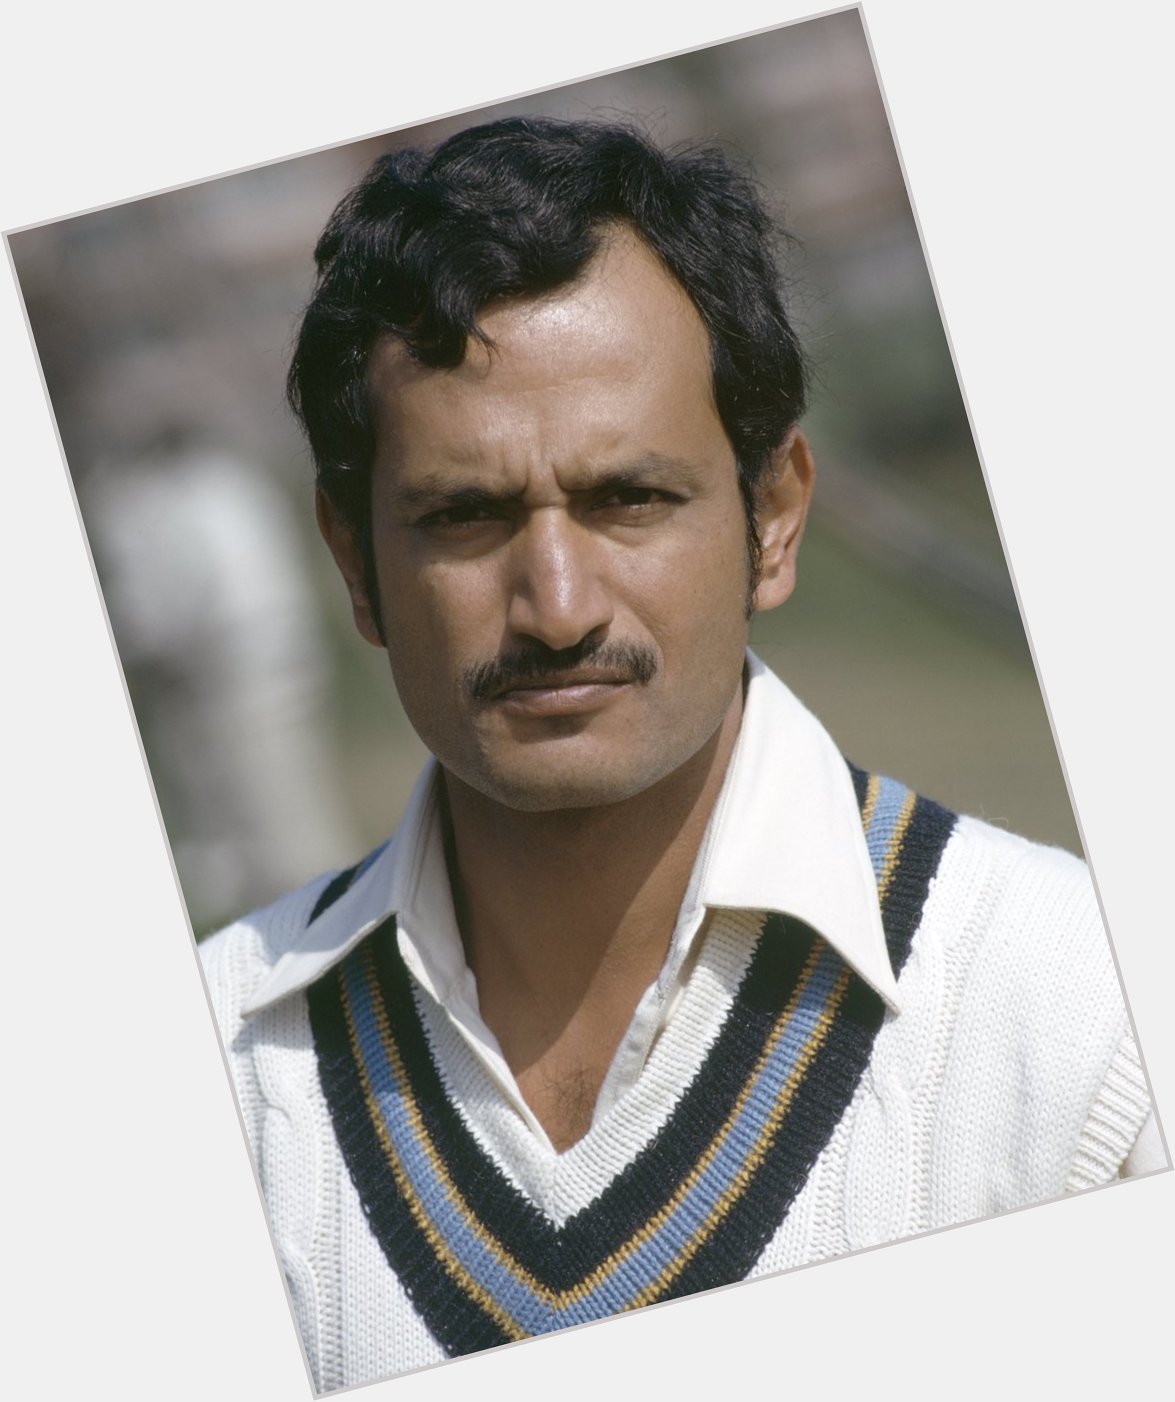 Happy Birthday to a former India captain who led them to their first Test and series win in England, Ajit Wadekar! 